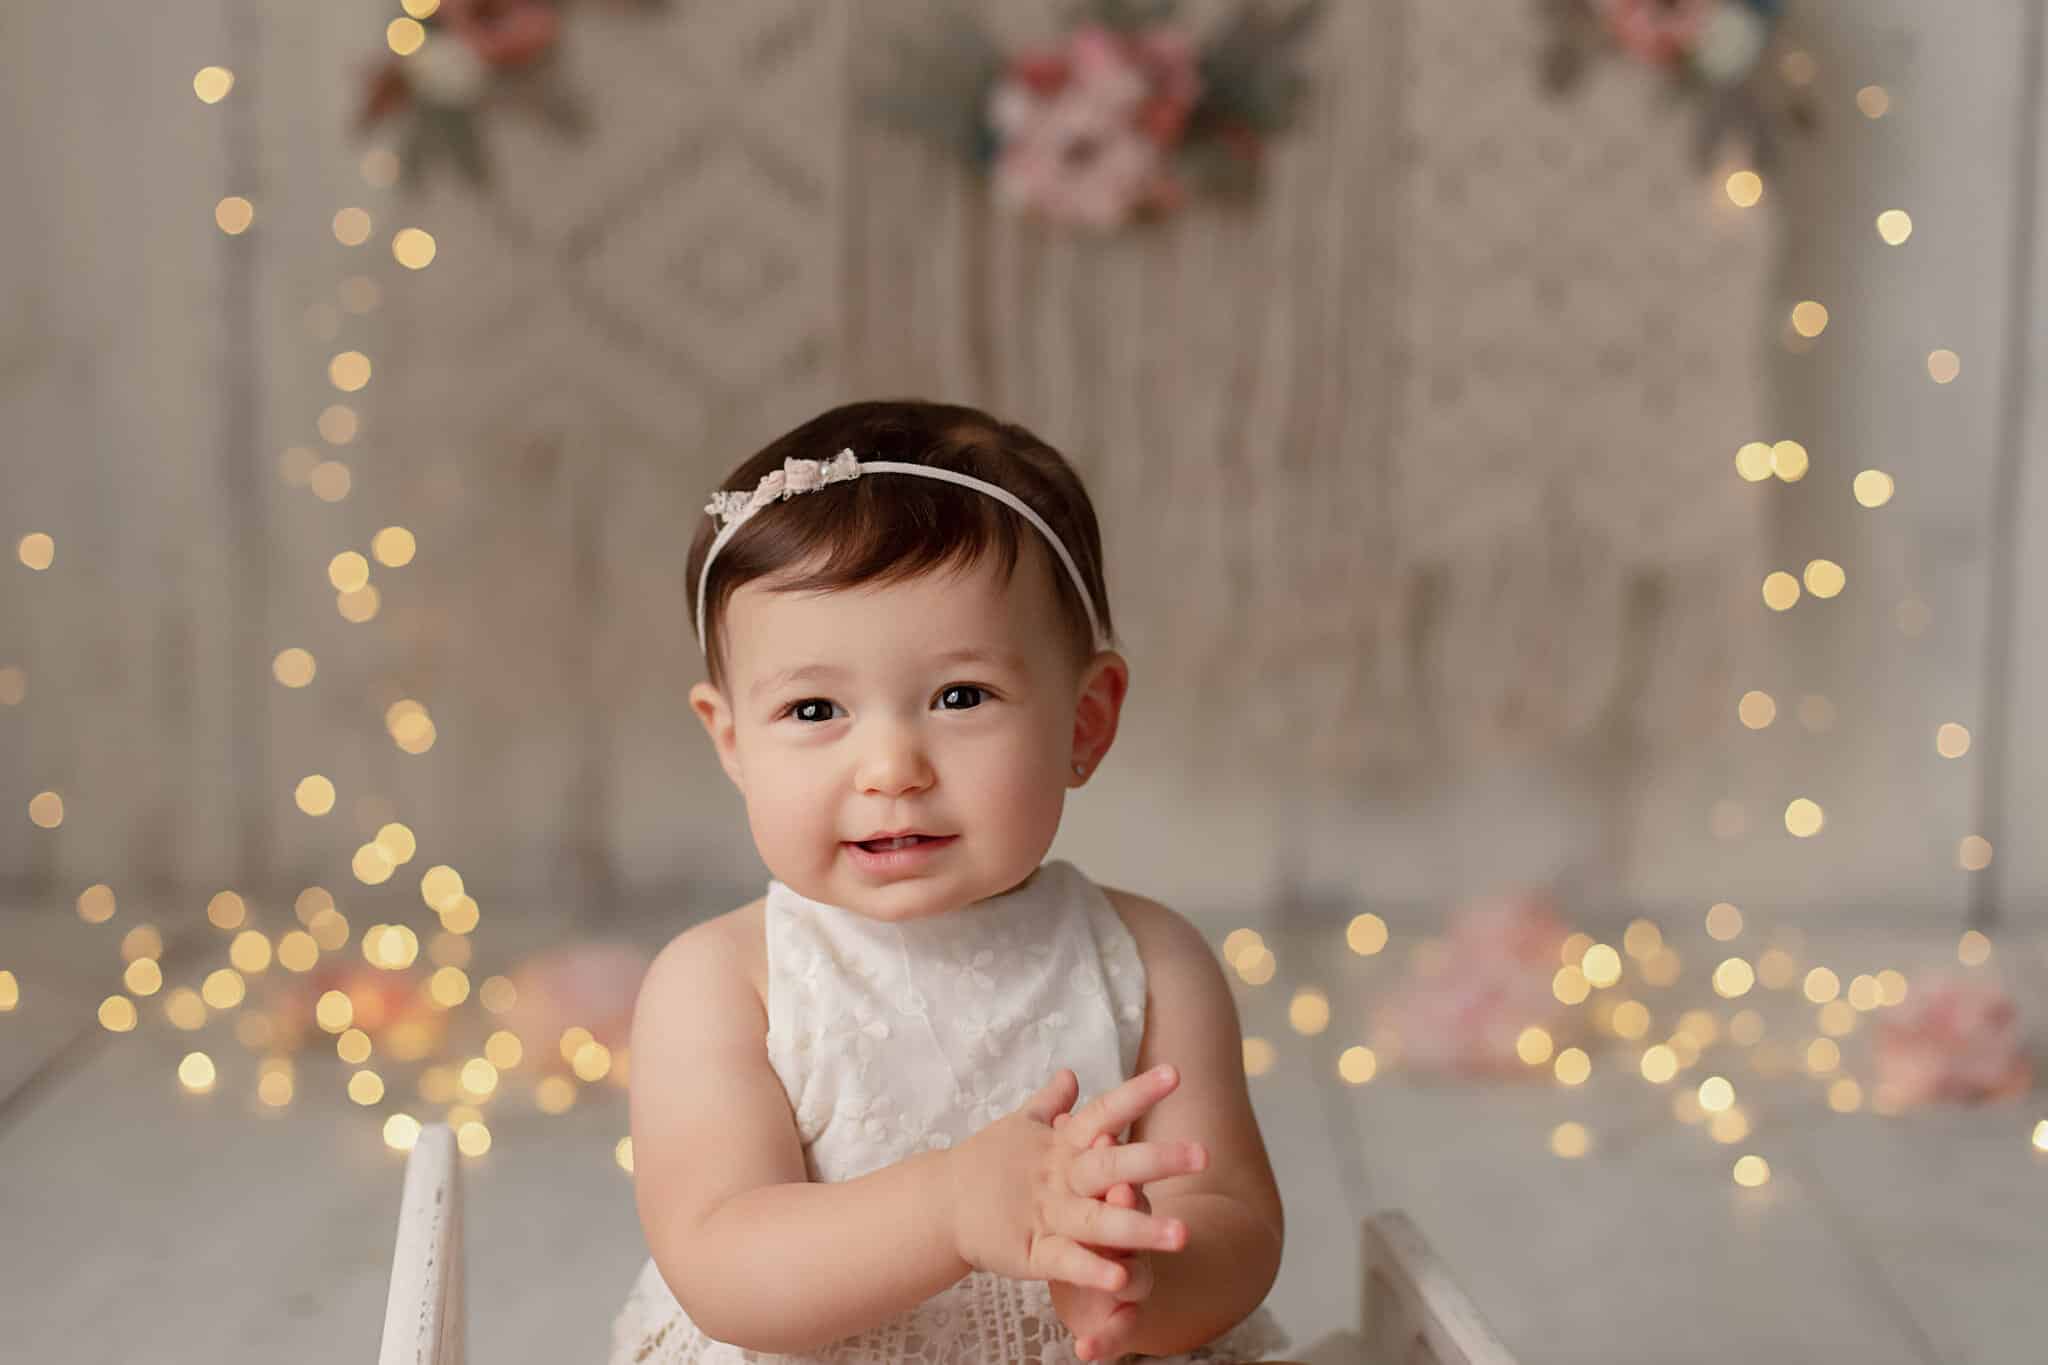 A baby girl sitting in a wooden chair with string lights illuminating the background